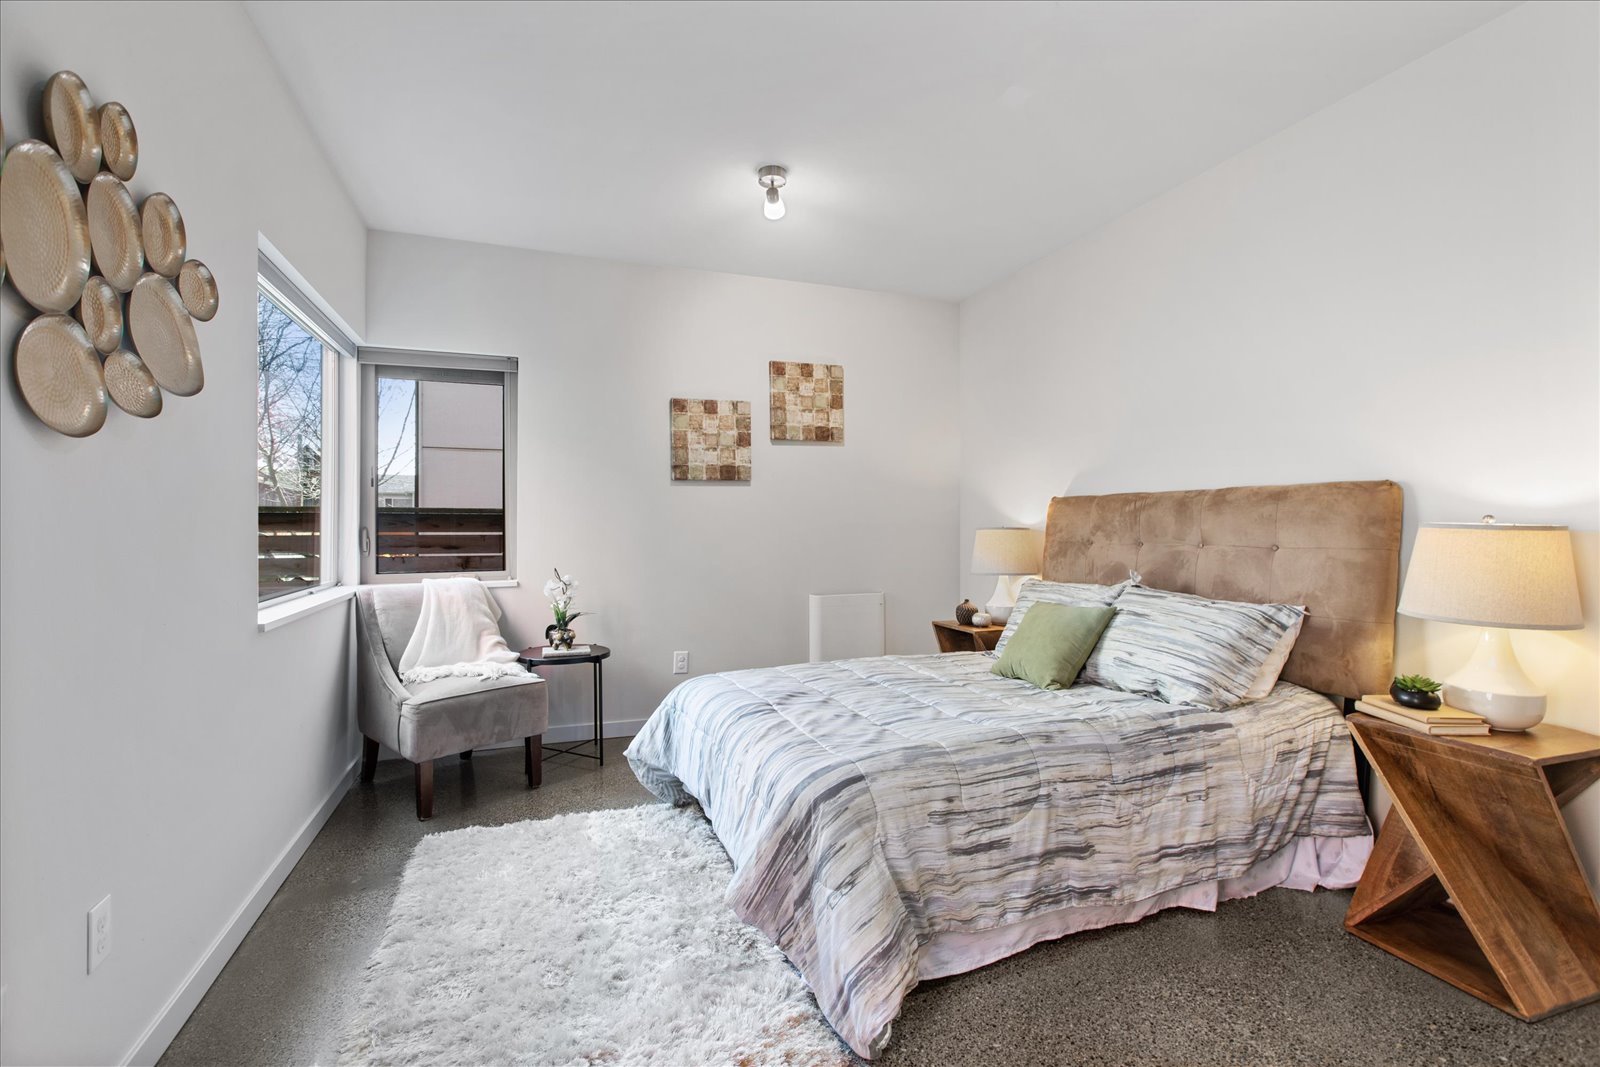 One of the first floor bedrooms at 420 26th Ave S #B Seattle WA 98144